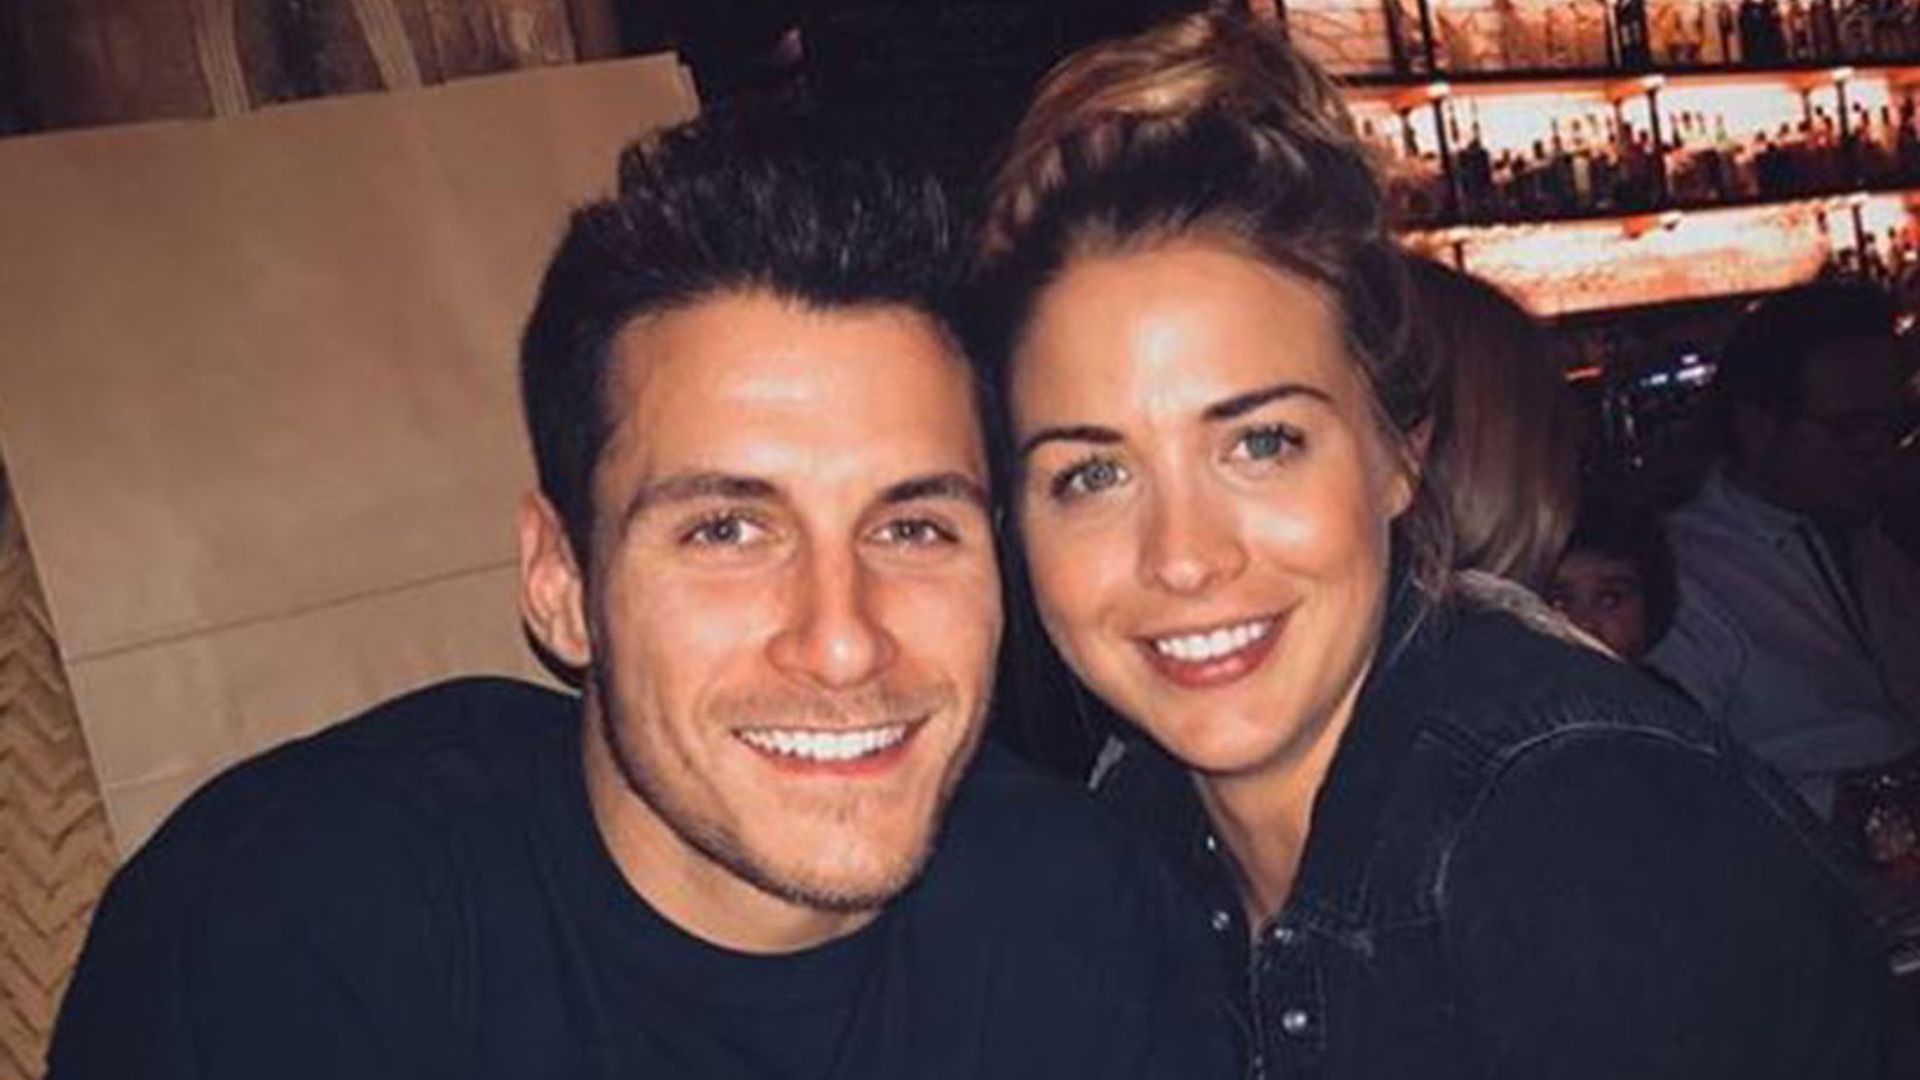 Gorka Marquez posts loved-up message to girlfriend Gemma Atkinson - she's 'the best company'